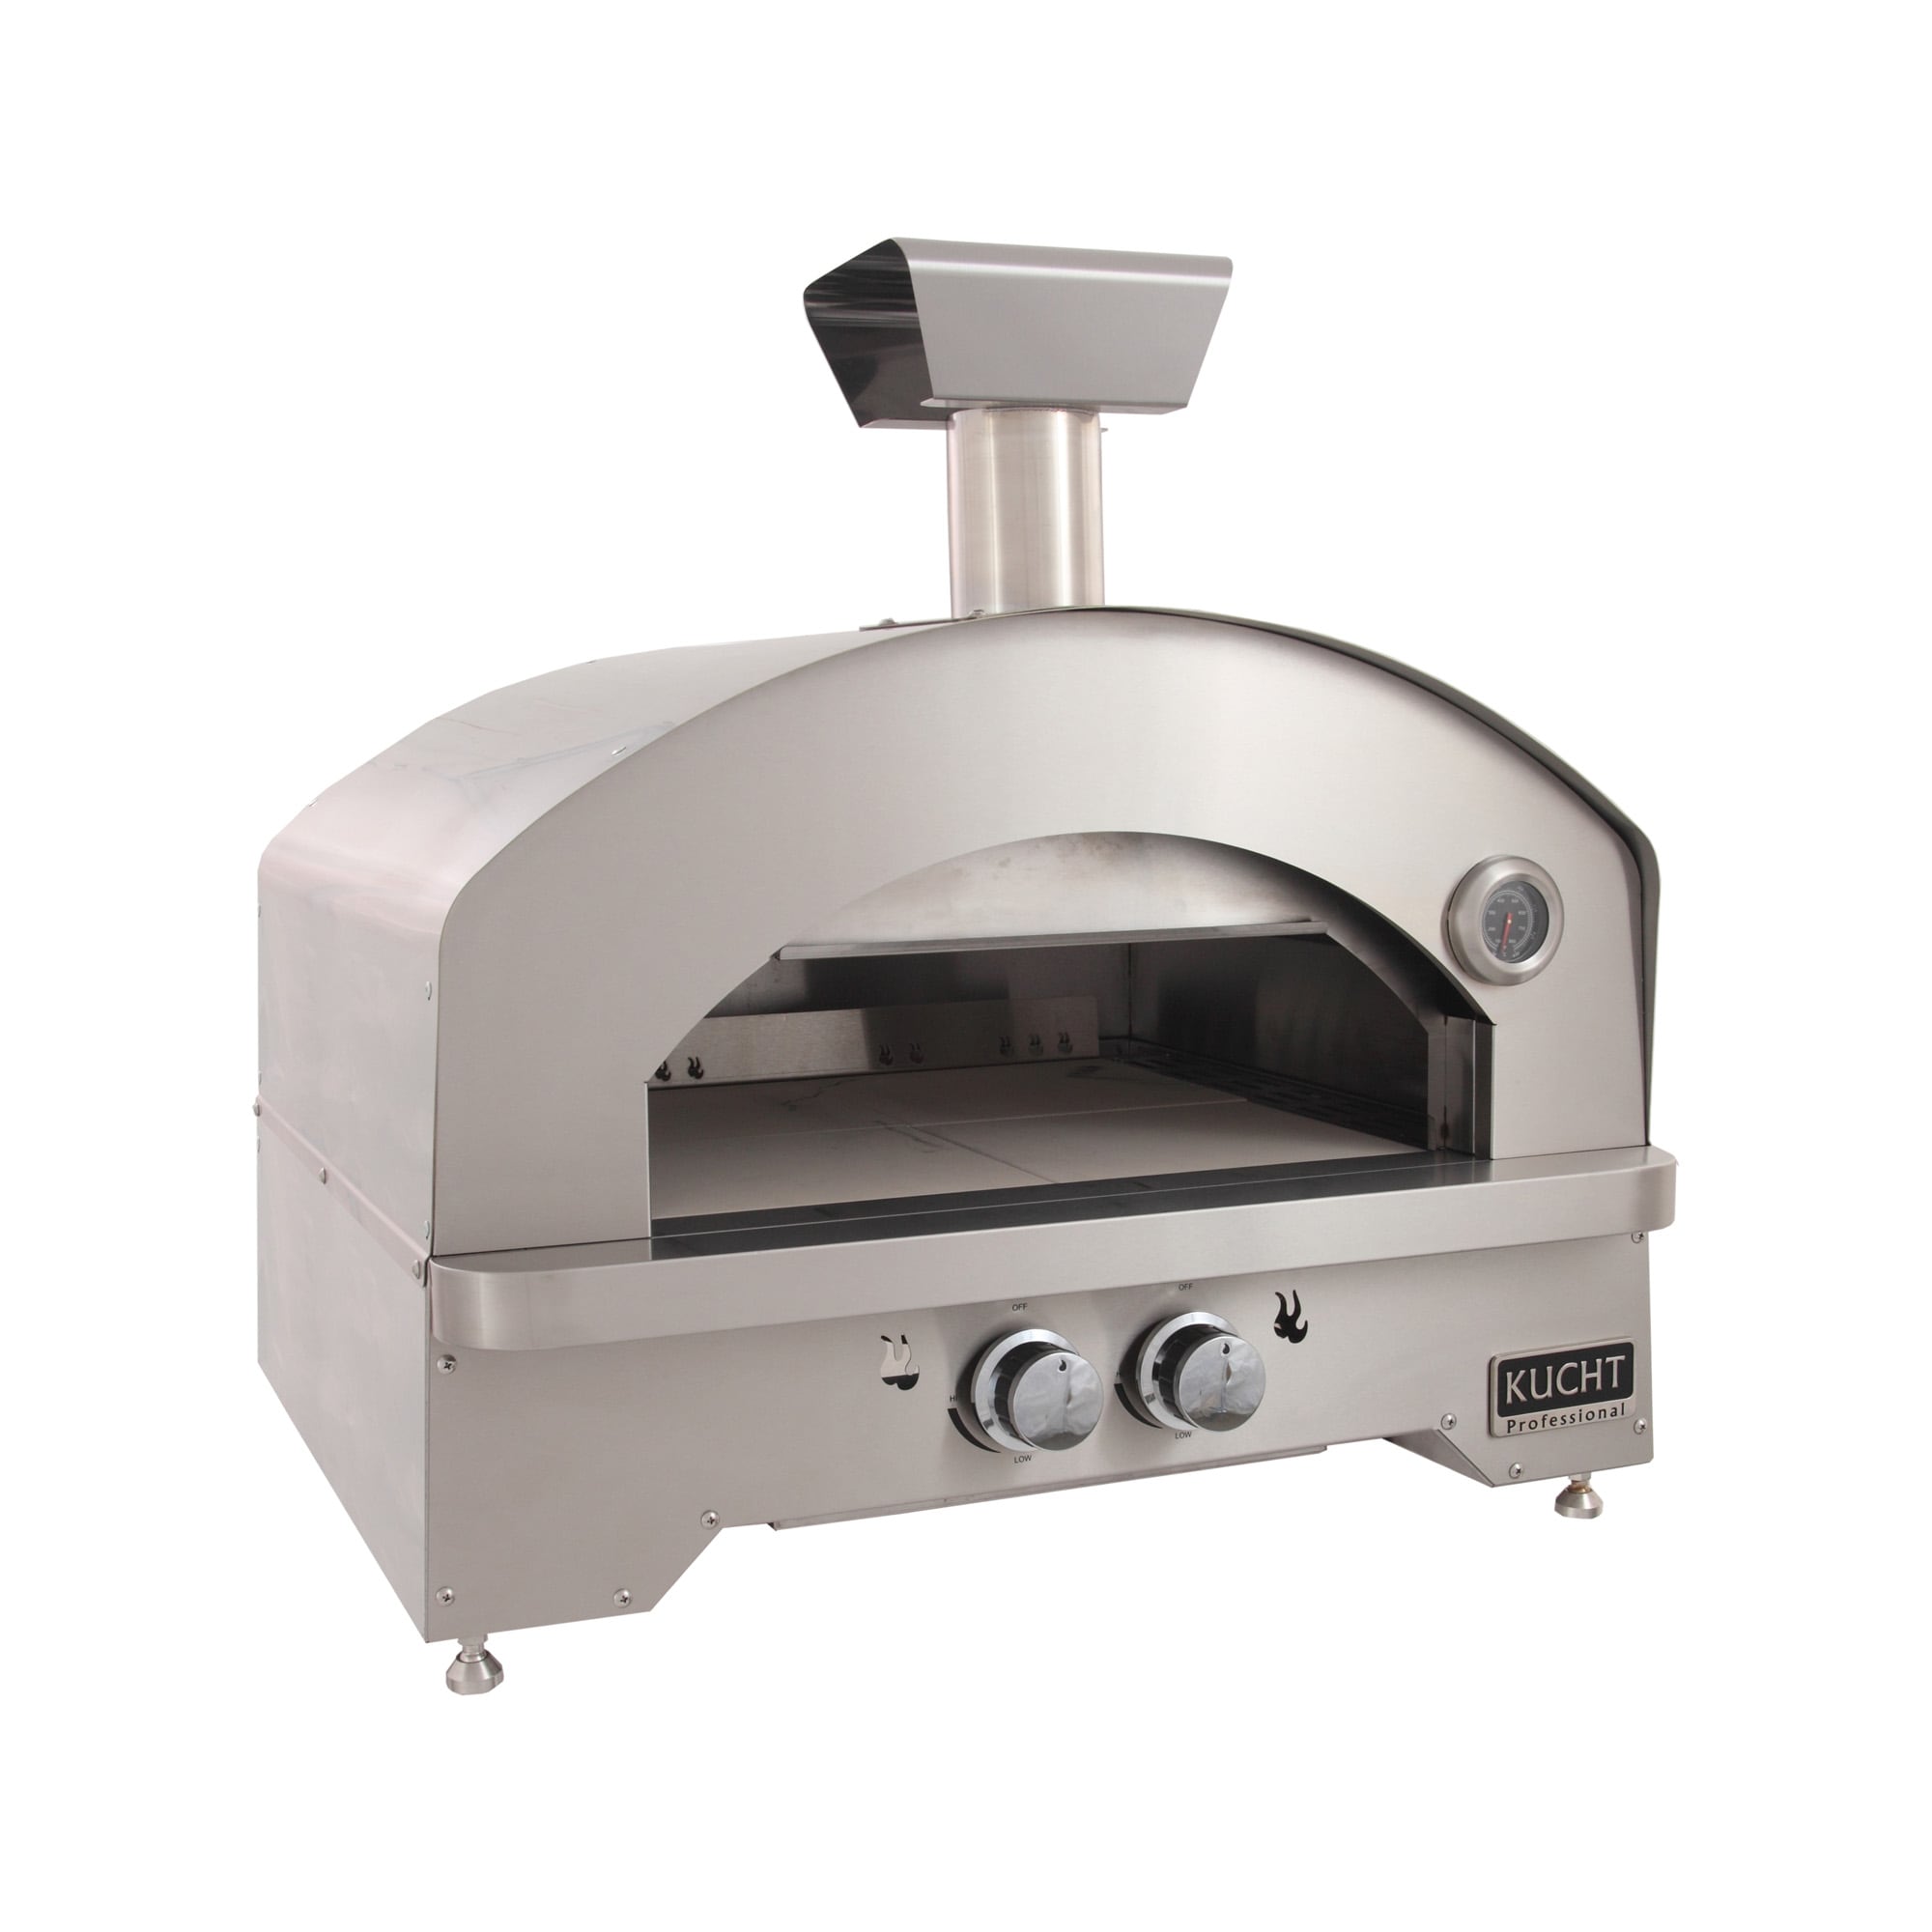 Pit Boss Pizza Oven: The Ultimate Dream for Pizza Lovers!